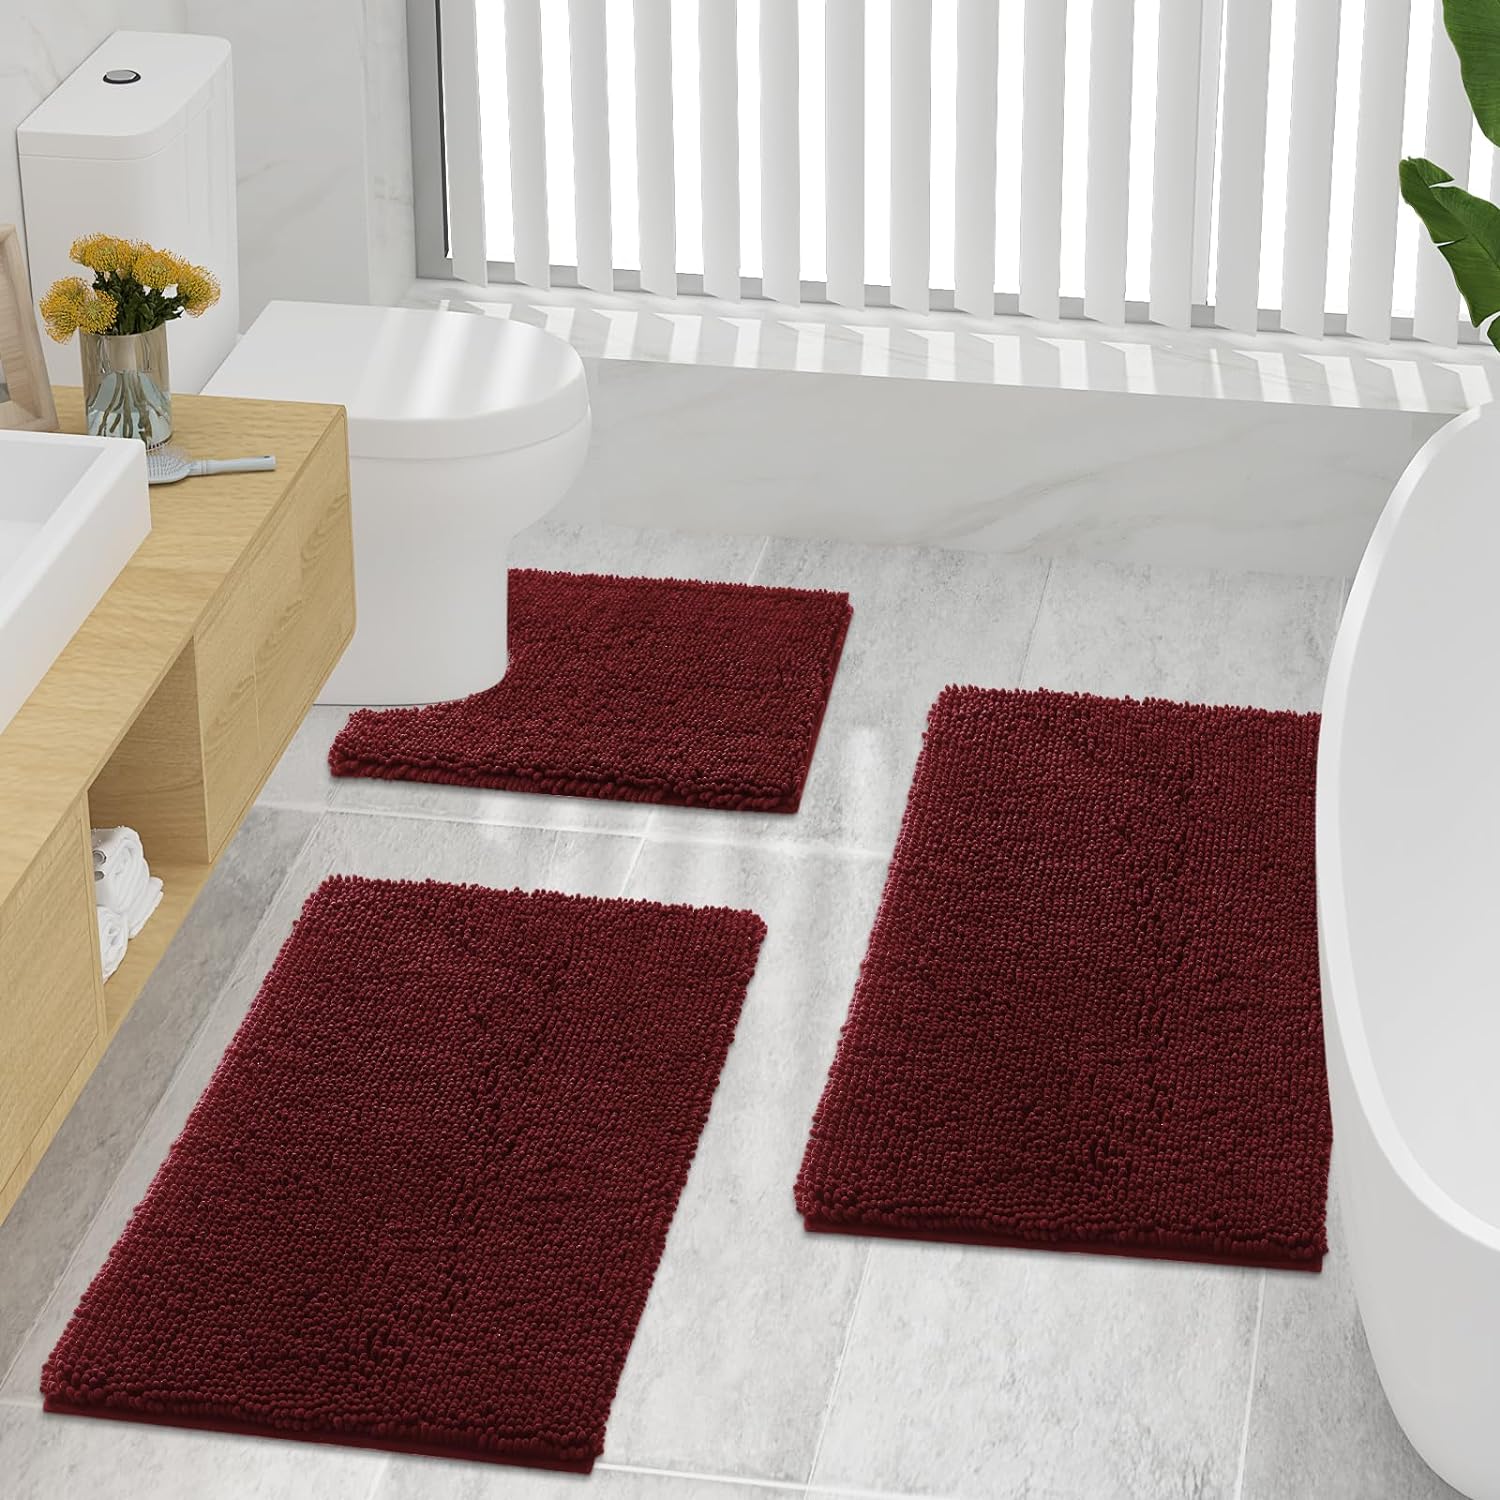 smiry Luxury Chenille Bath Rug, Extra Soft and Absorbent Shaggy Bathroom Mat Rugs, Machine Washable, Non-Slip Plush Carpet Runner for Tub, Shower, and Bath Room (24x16, White)